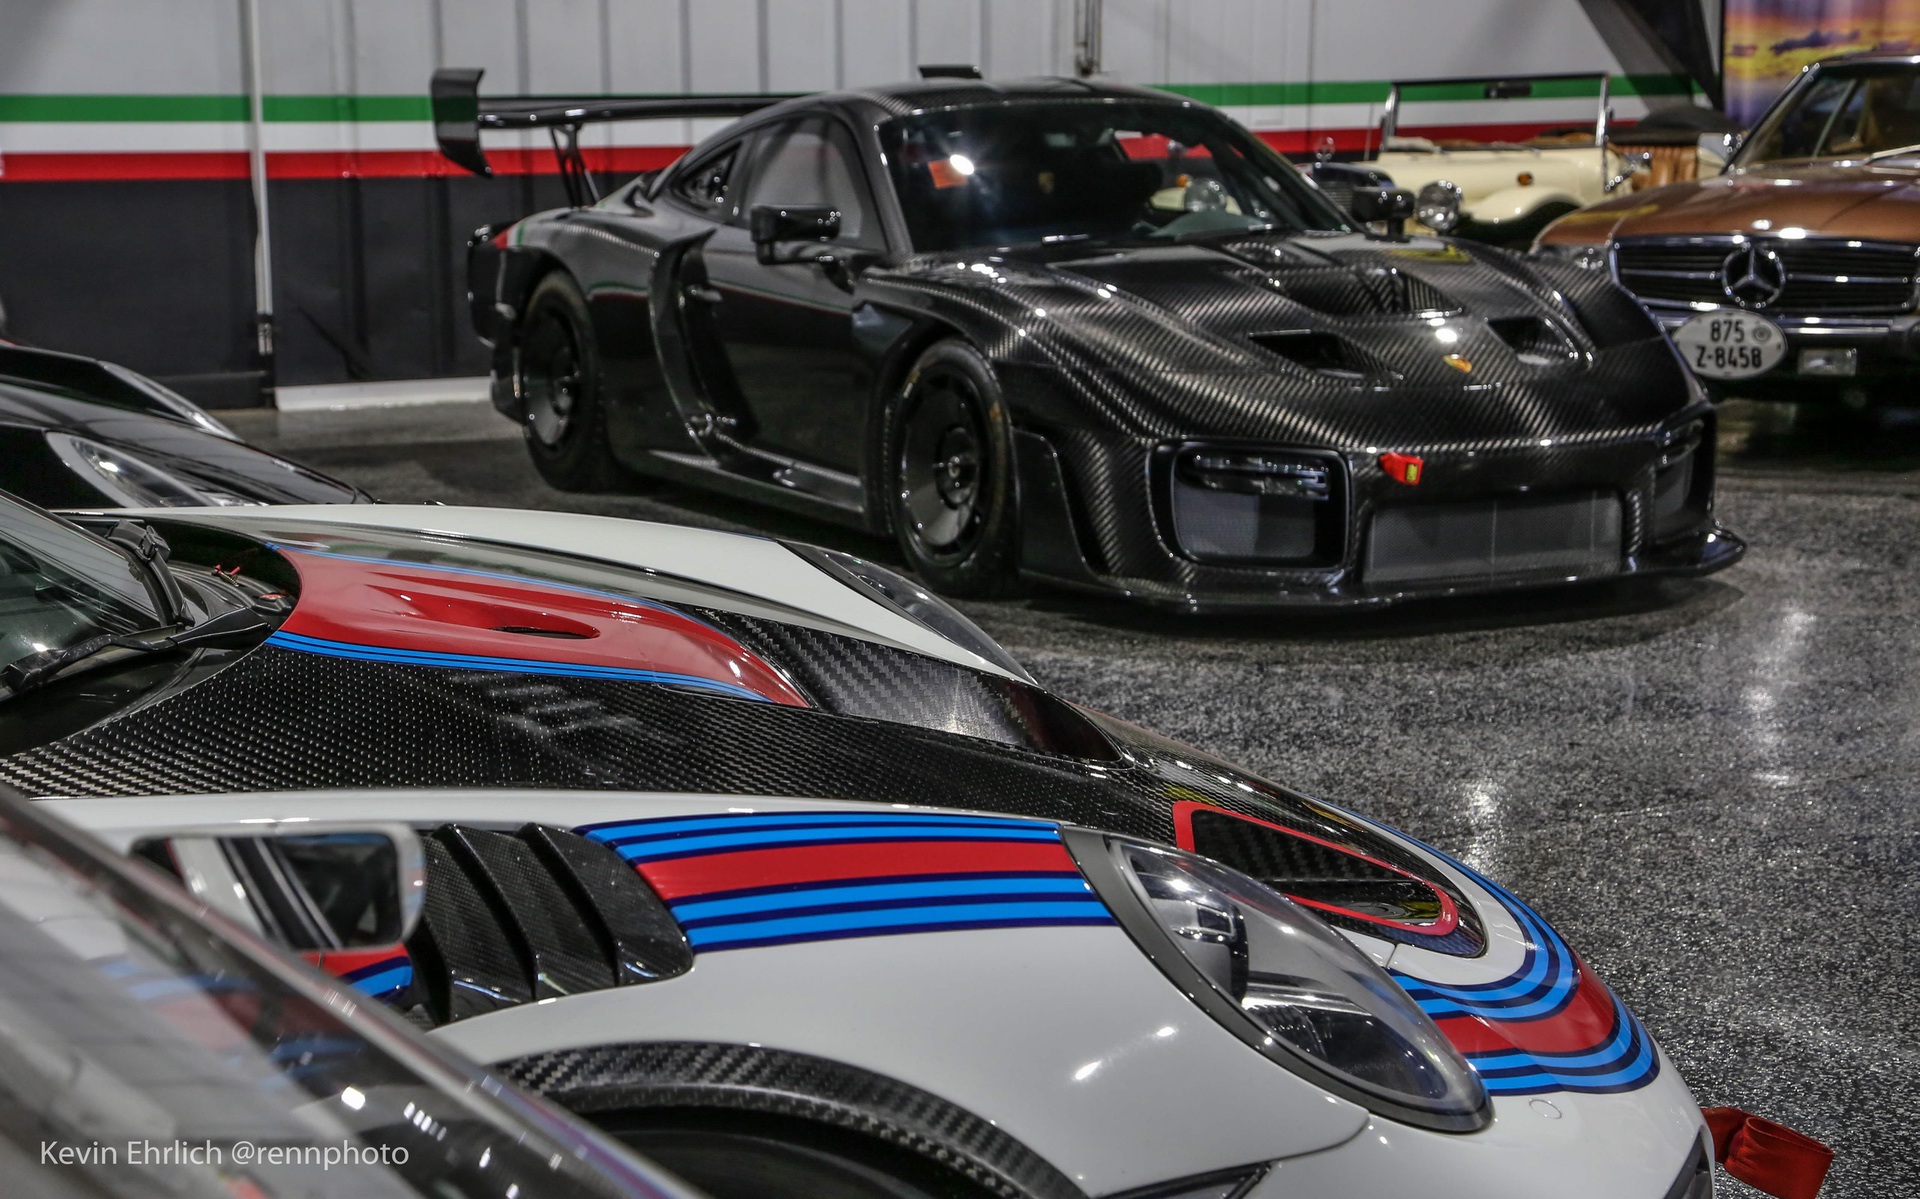 Black carbon fiber Porsche 935/19 in showroom with other cars